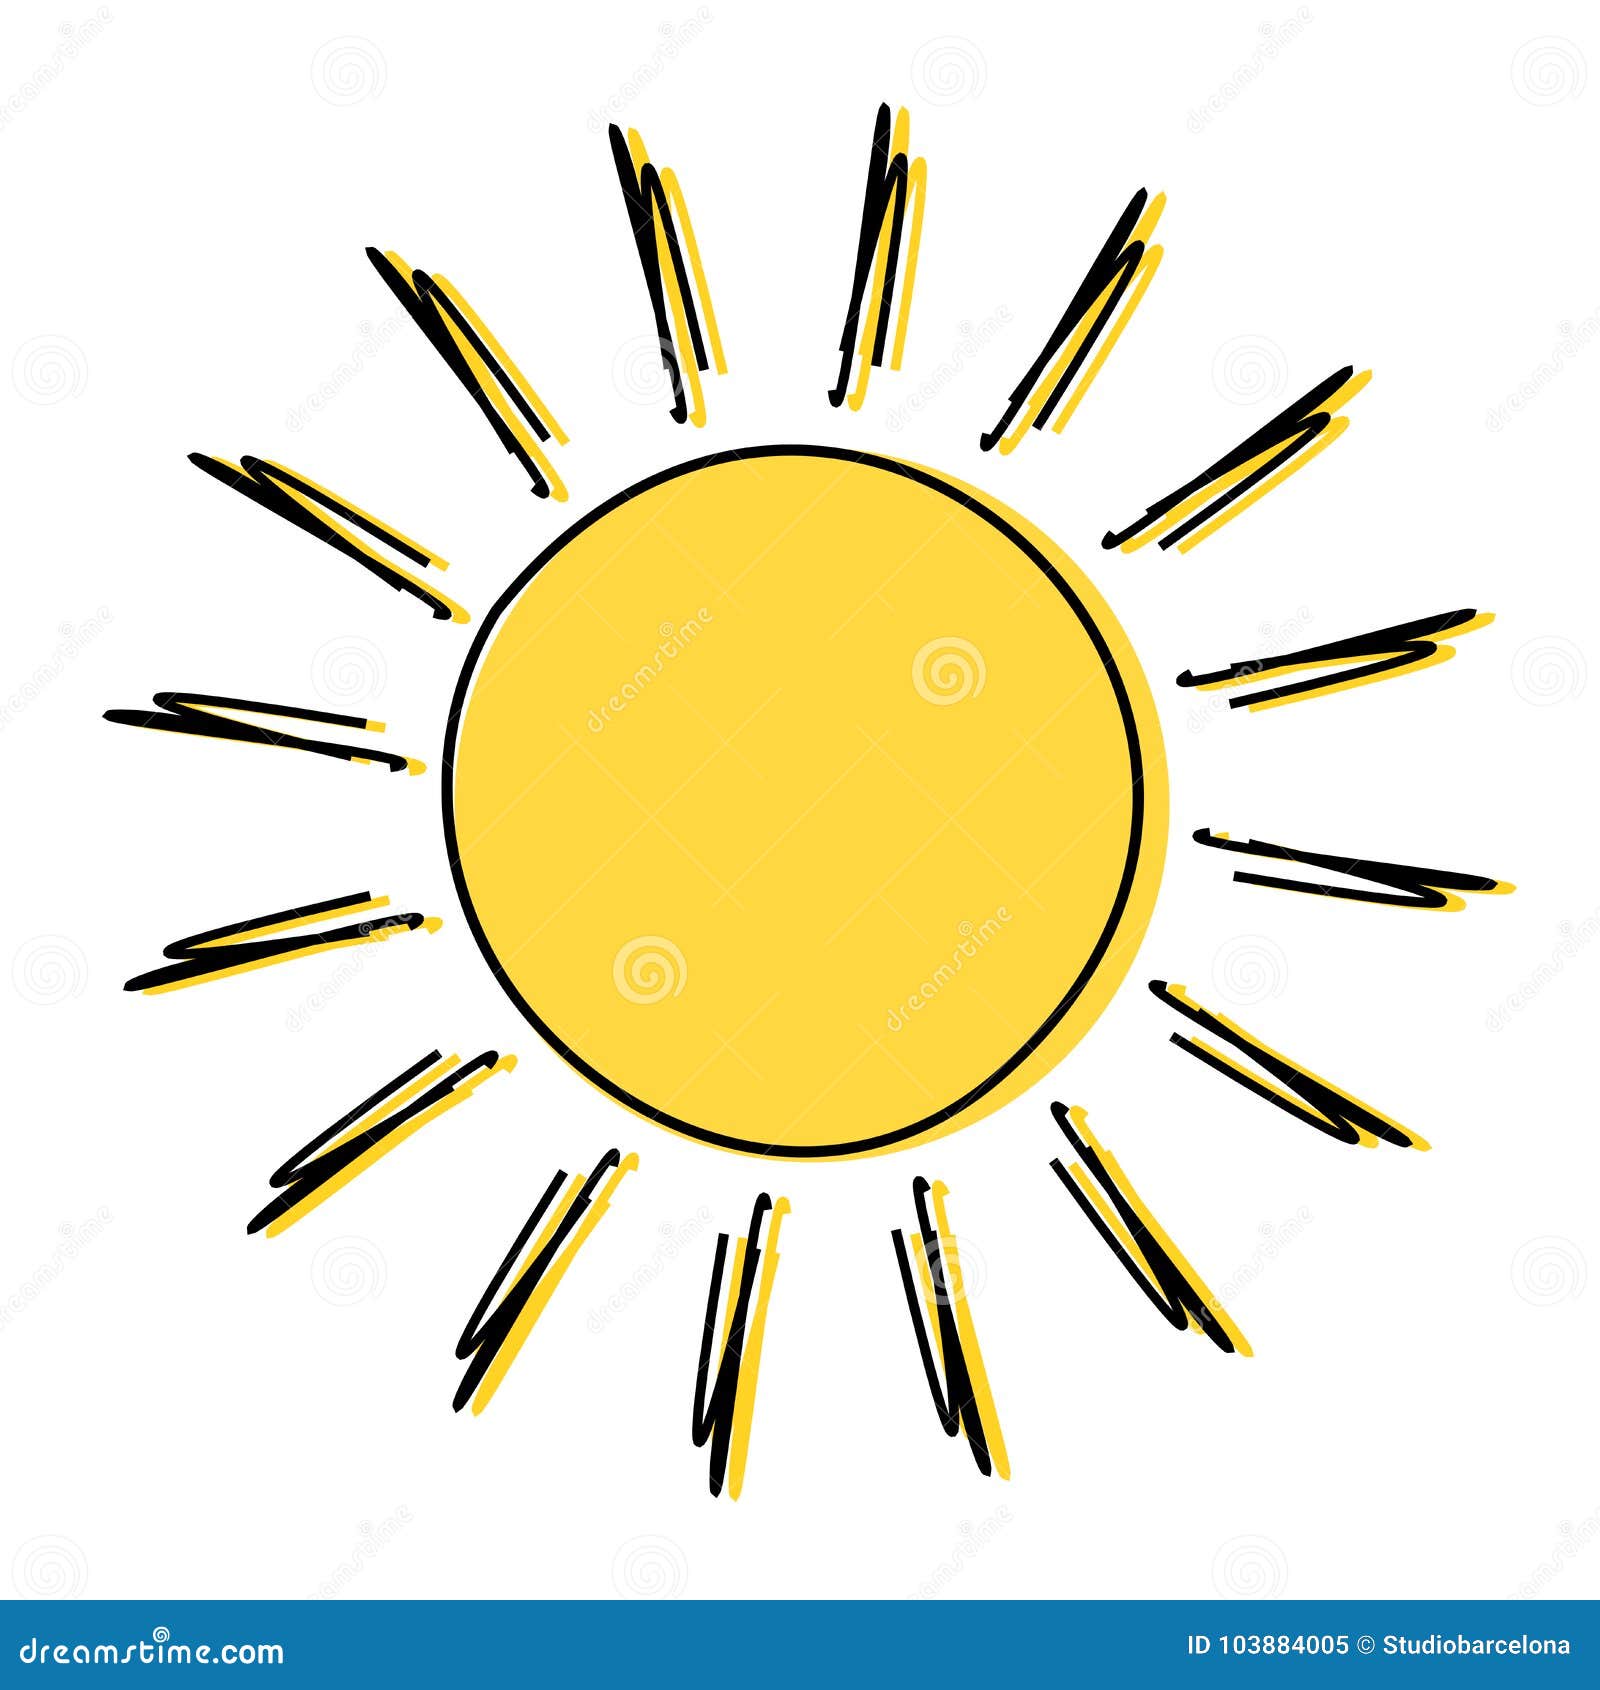 Vintage line drawing sun with face and closed Vector Image